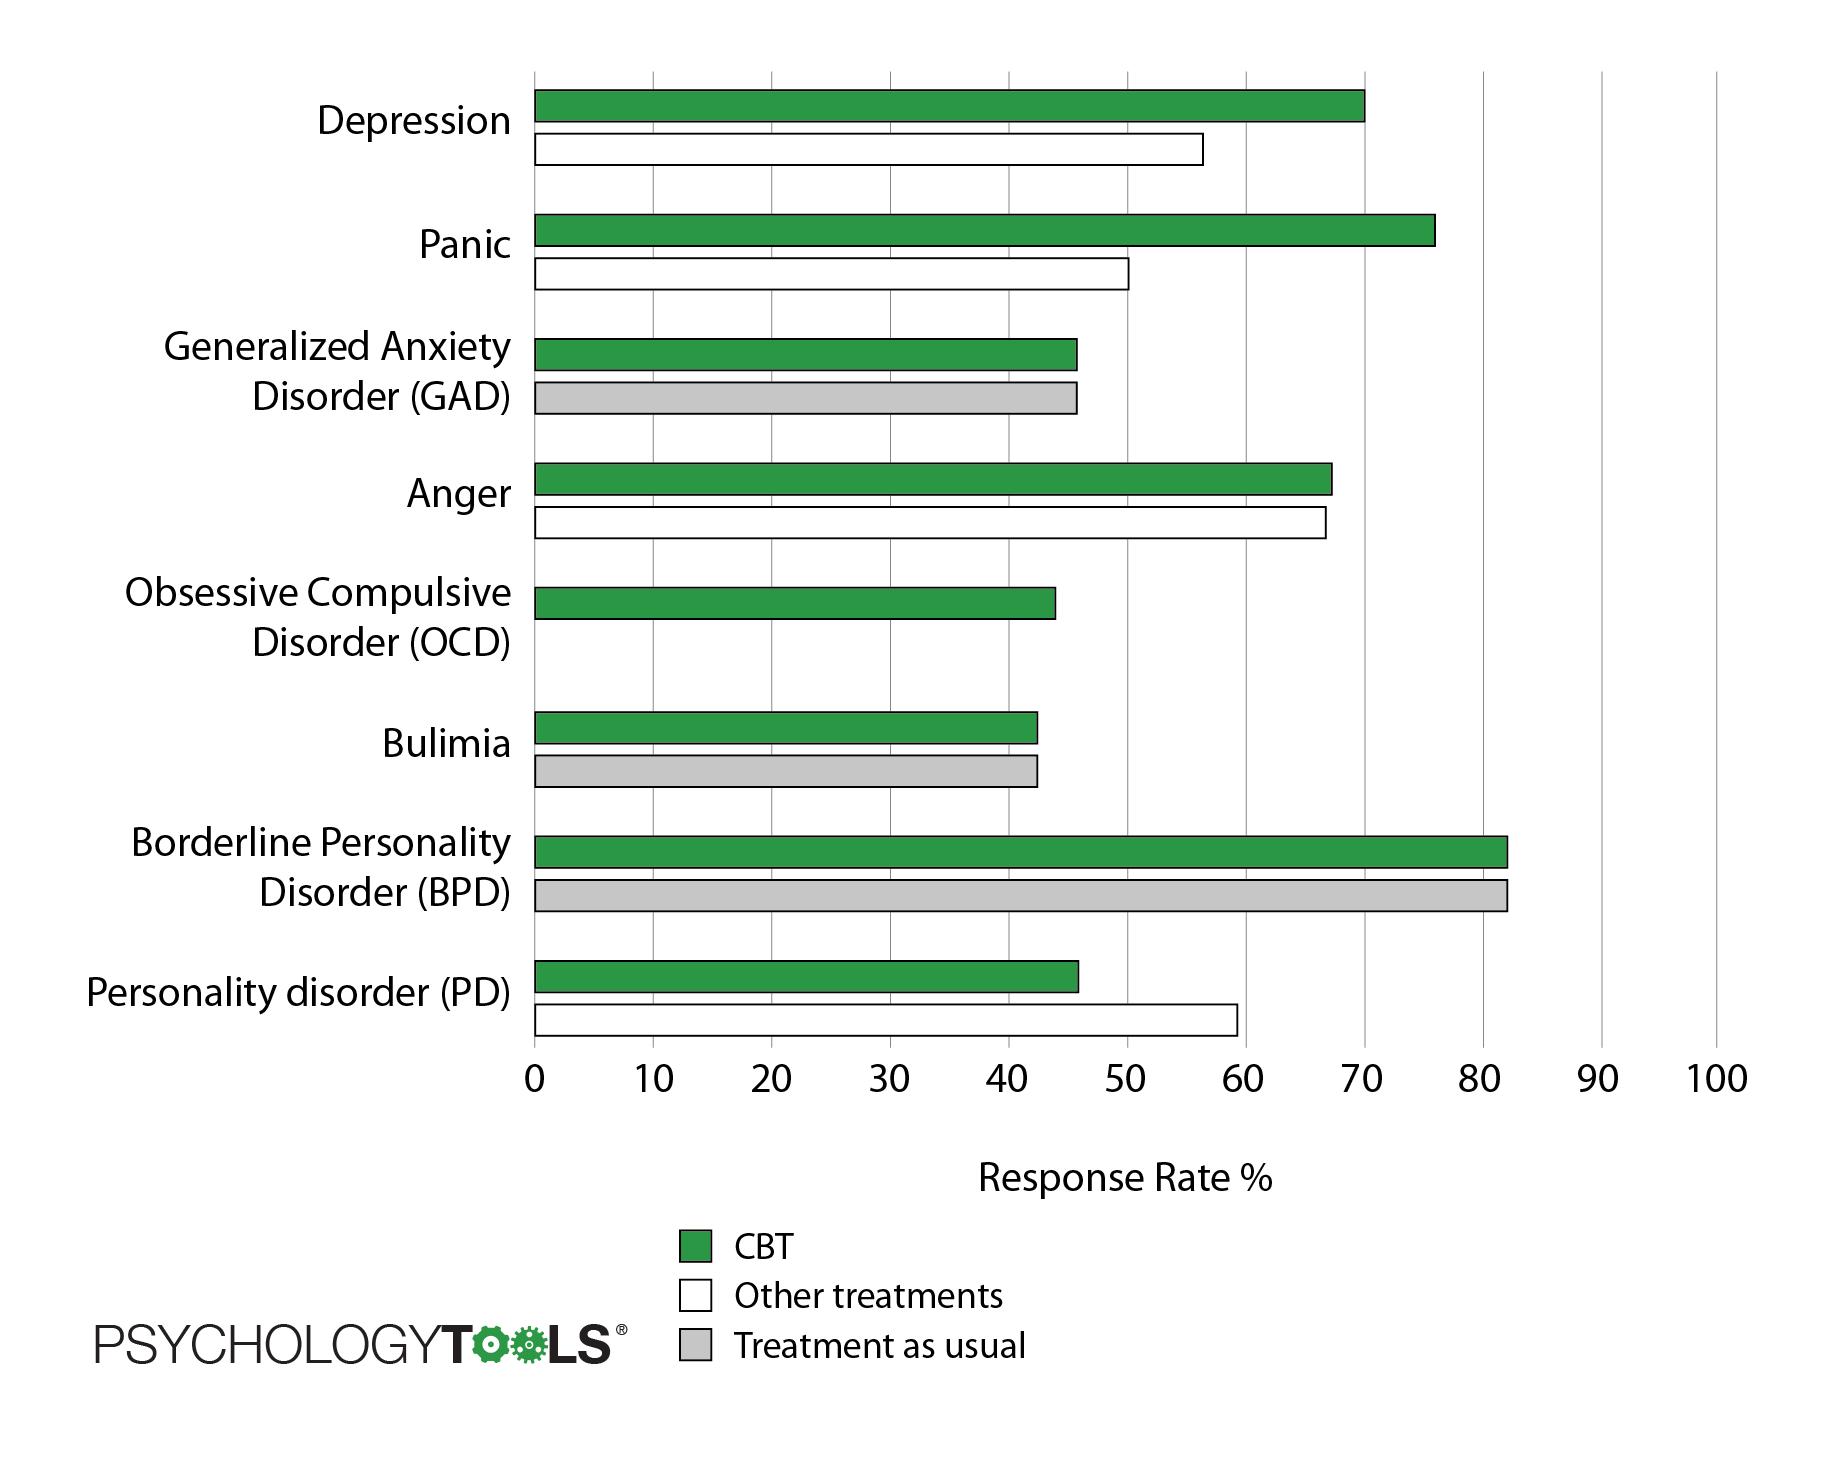 Response rates for CBT treatment versus other treatments